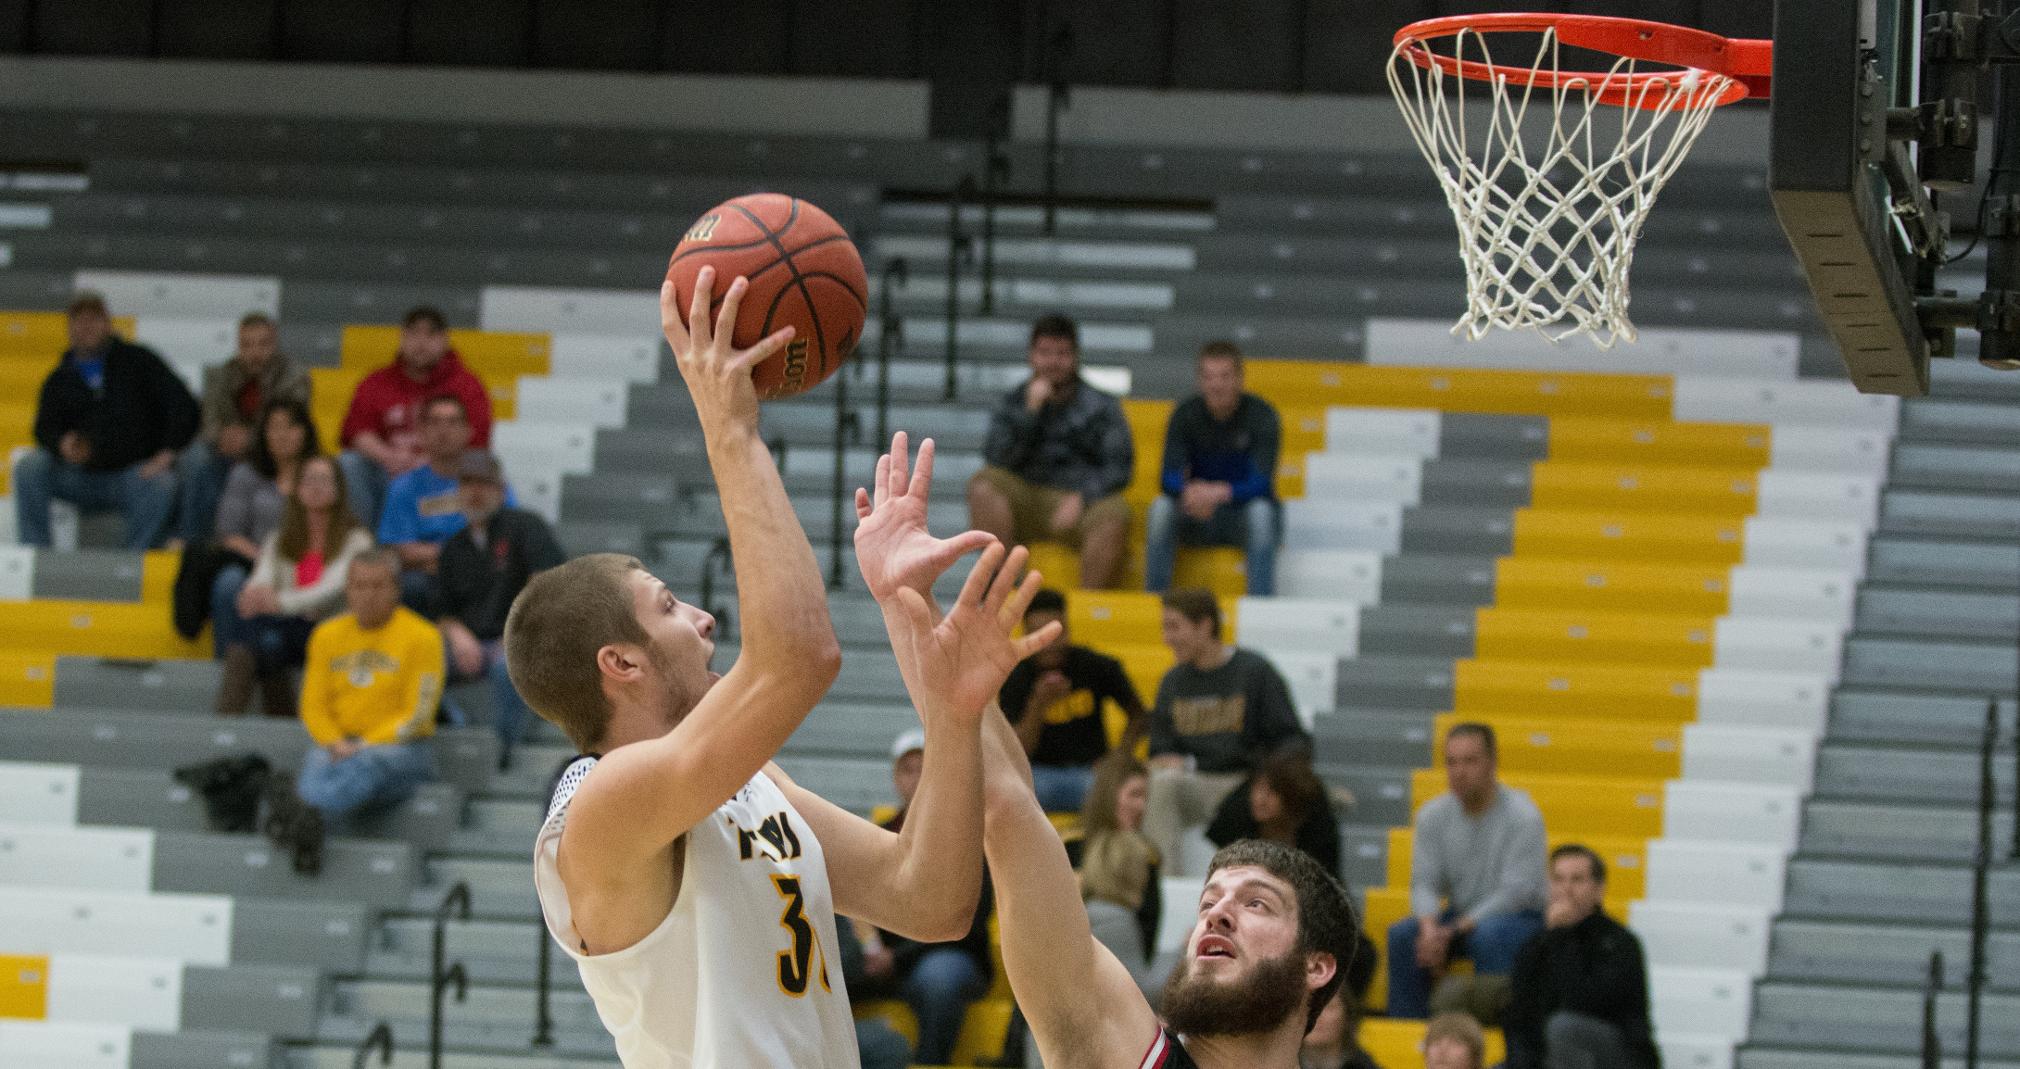 Max Schebel scored five points while collecting a game-high seven rebounds against the Eagles.